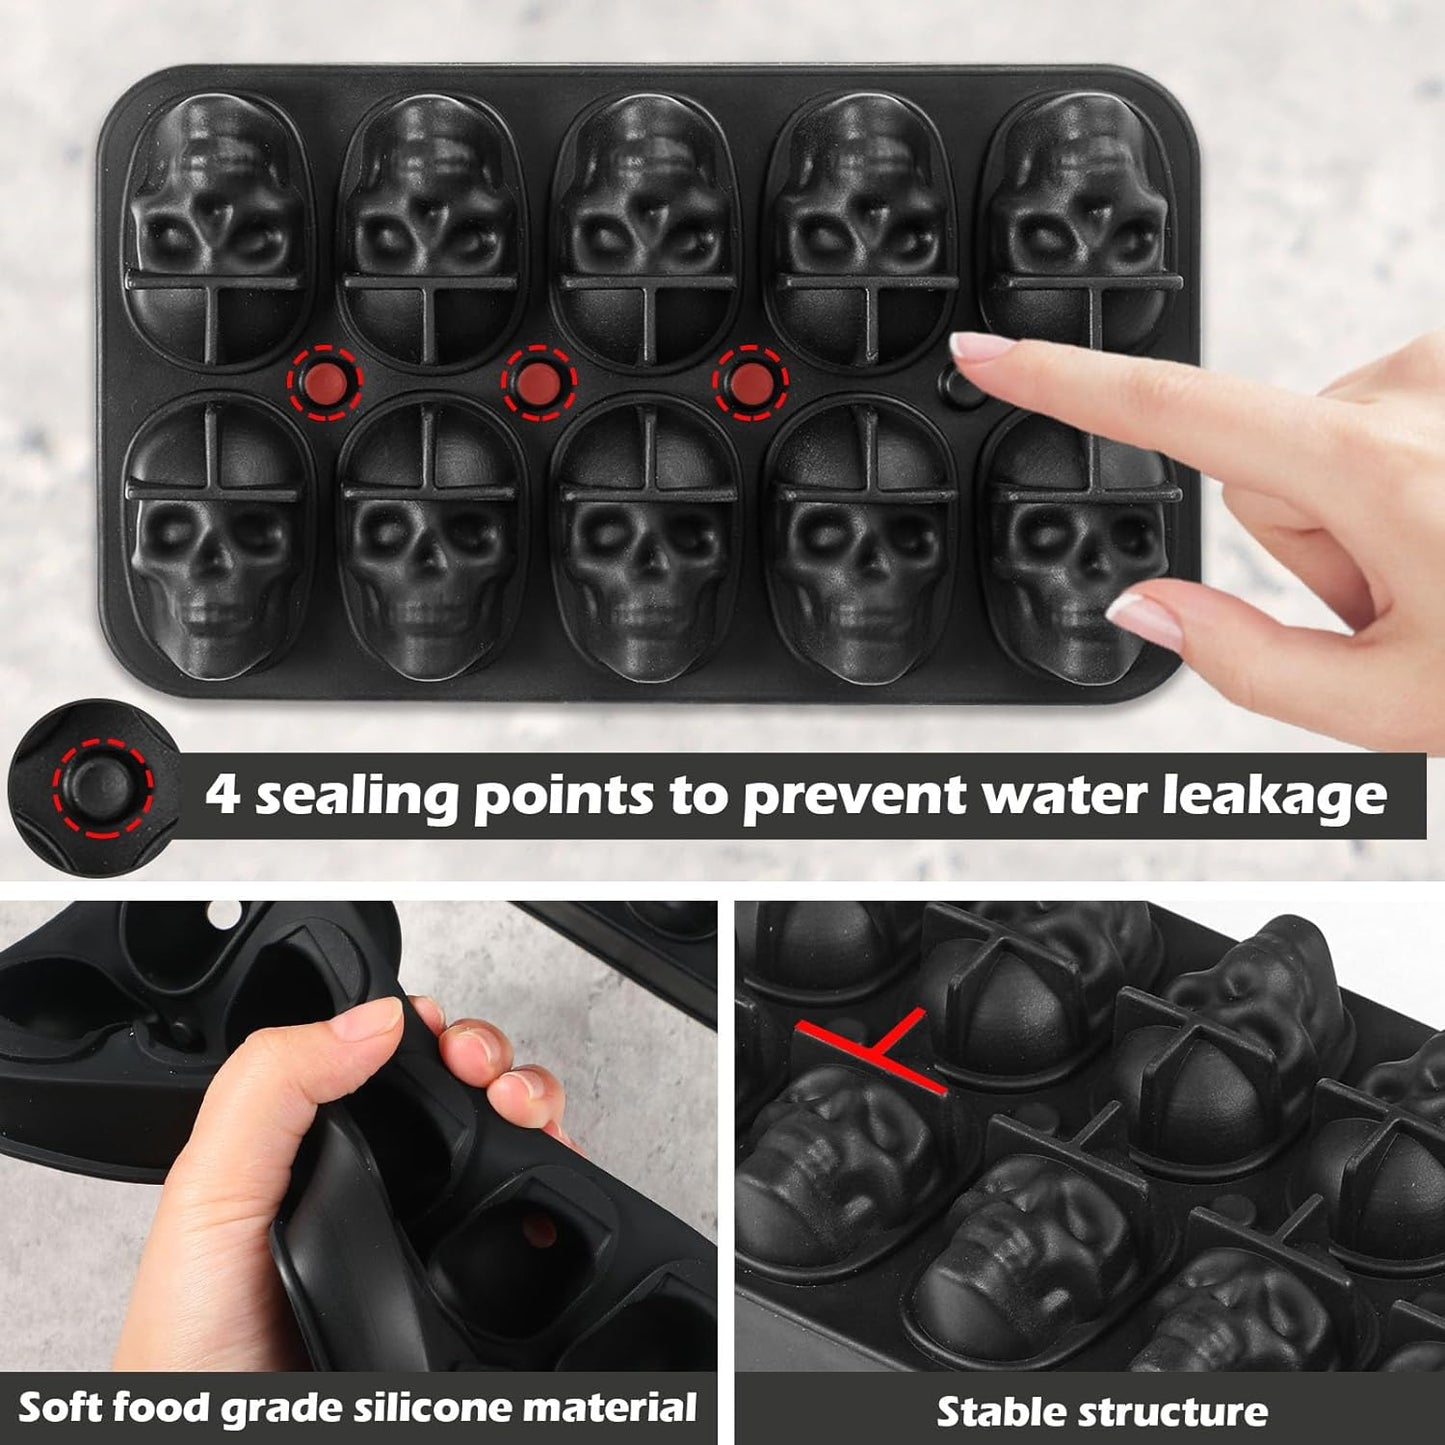 Webake Skull Ice Cube Mold, 10 Cavity Silicone Ice Mold with Lid